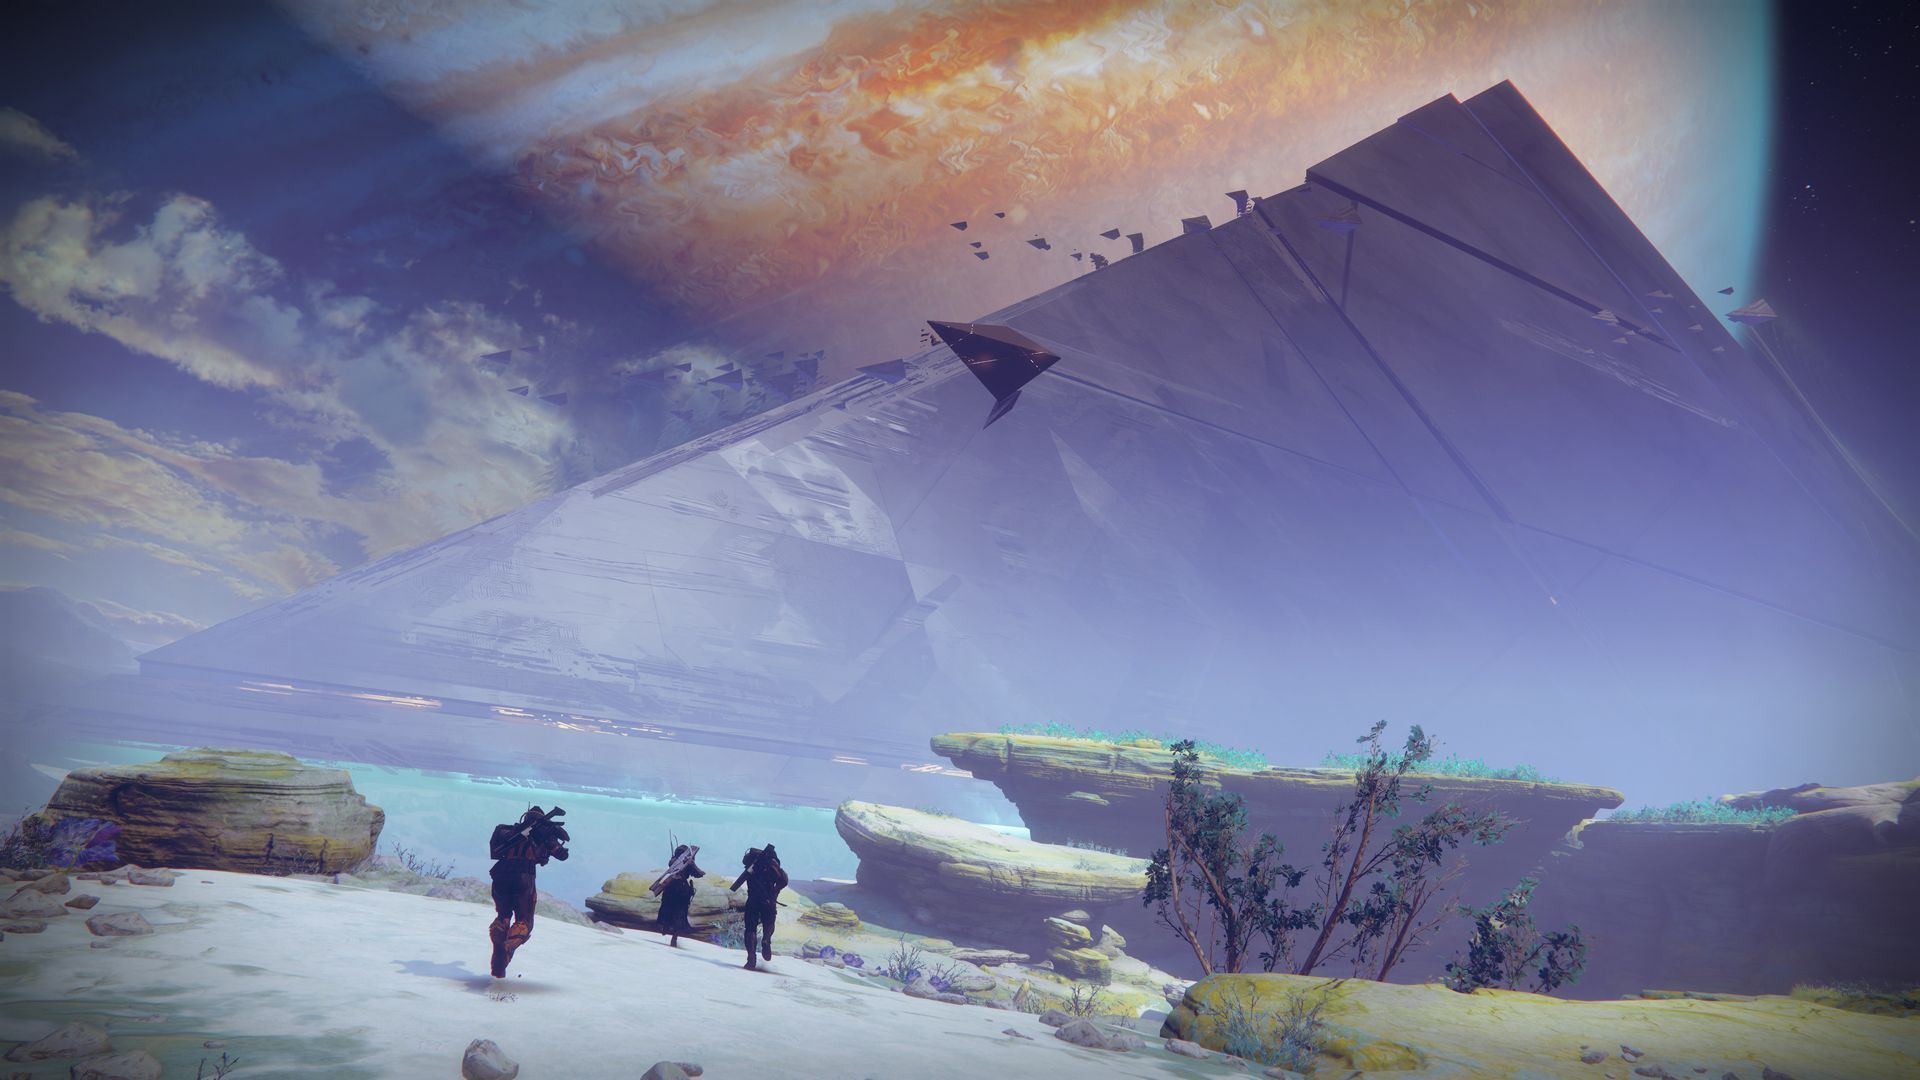 Destiny 2 and Valorant developers have joined forces to sue a cheat maker